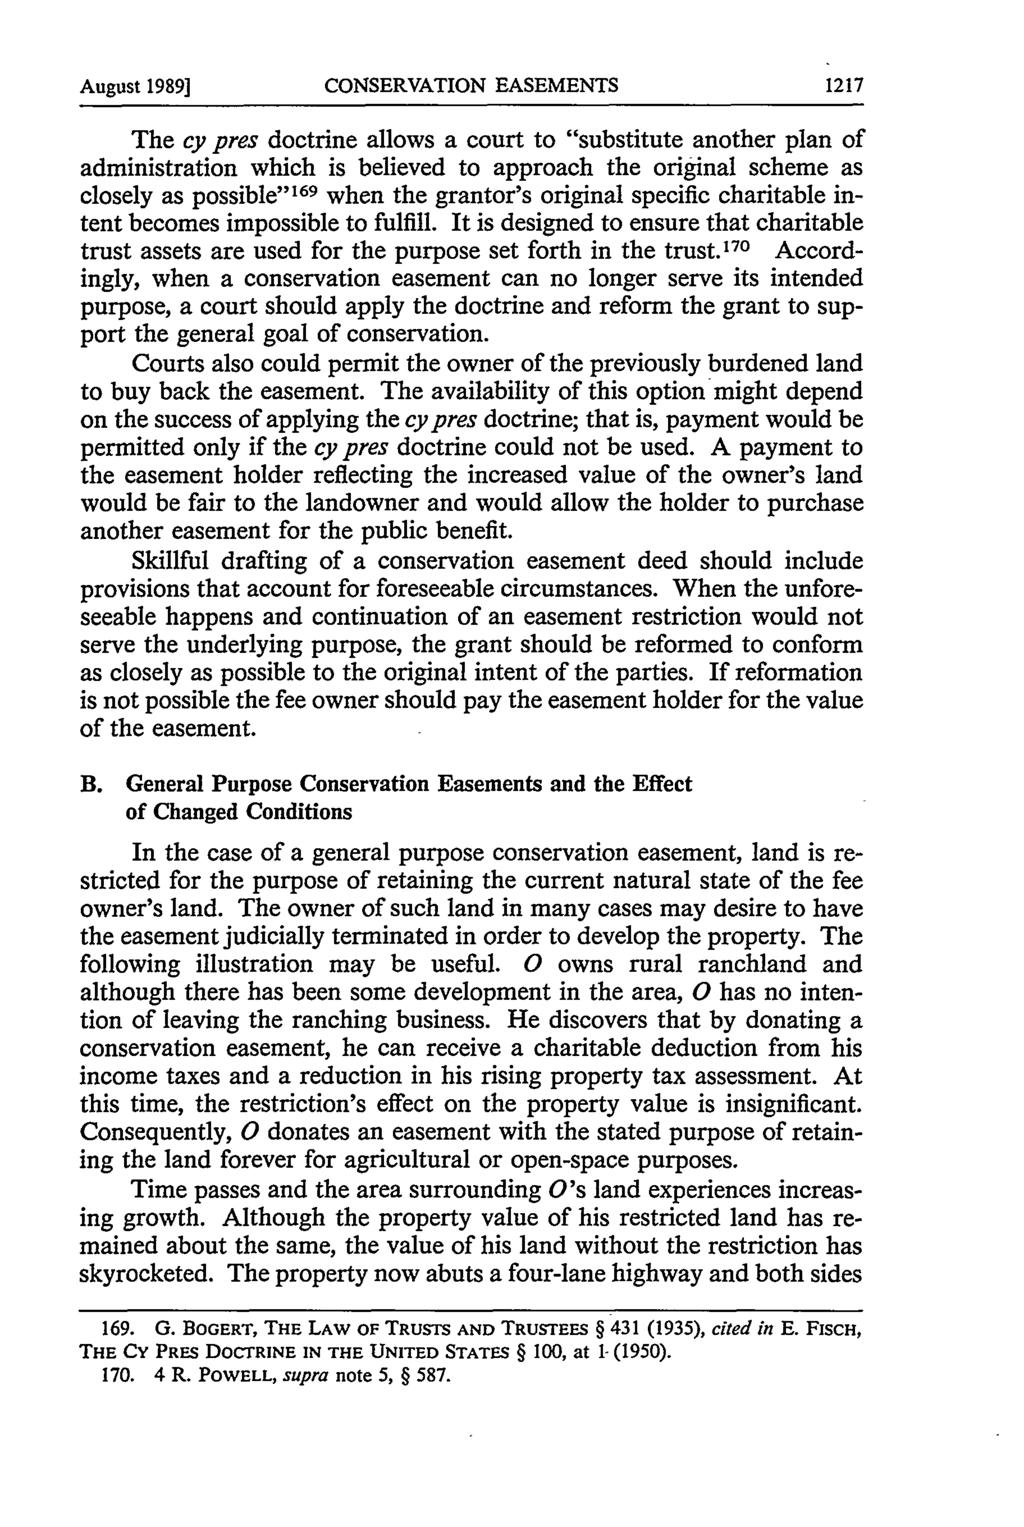 August 1989] CONSERVATION EASEMENTS The cy pres doctrine allows a court to "substitute another plan of administration which is believed to approach the original scheme as closely as possible" 169